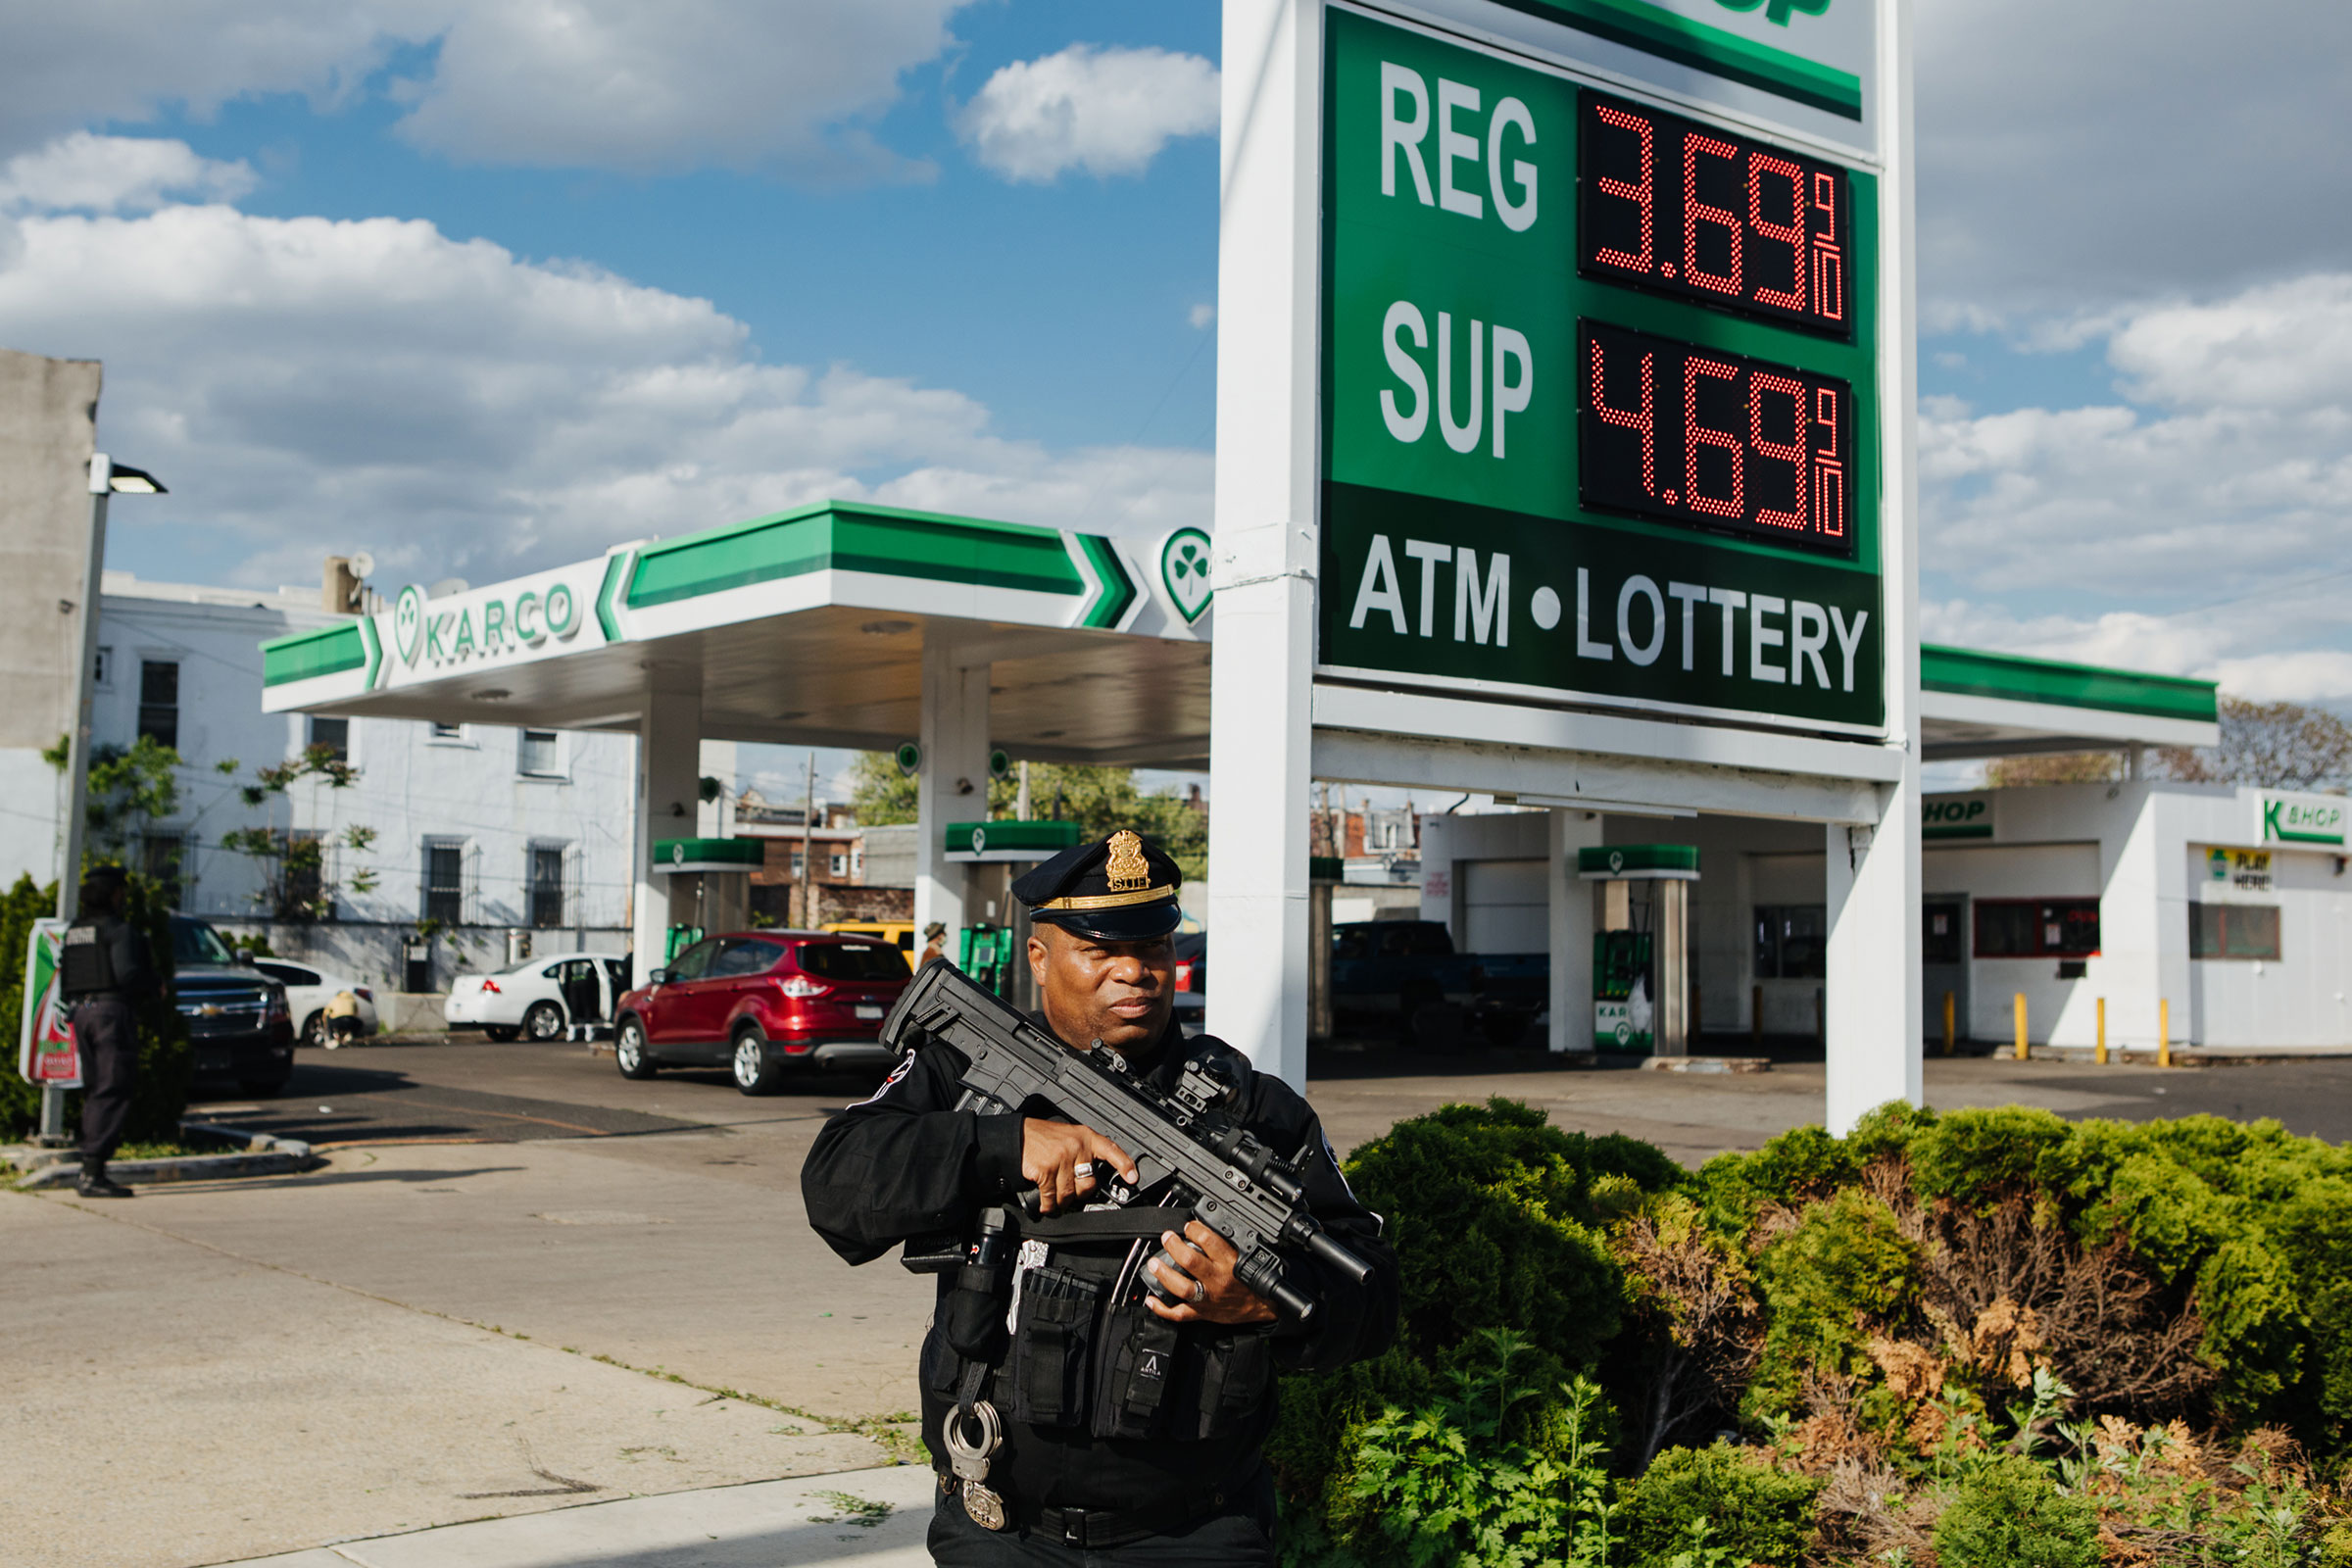 Andre Boyer, an agent for the Strategic Intervention Tactical Enforcement (S.I.T.E.), is seen patrolling the sidewalk outside of a Karco gas station in North Philadelphia, Pa., armed with a Bullpup shotgun, on April 24, 2023. (Michelle Gustafson for TIME)